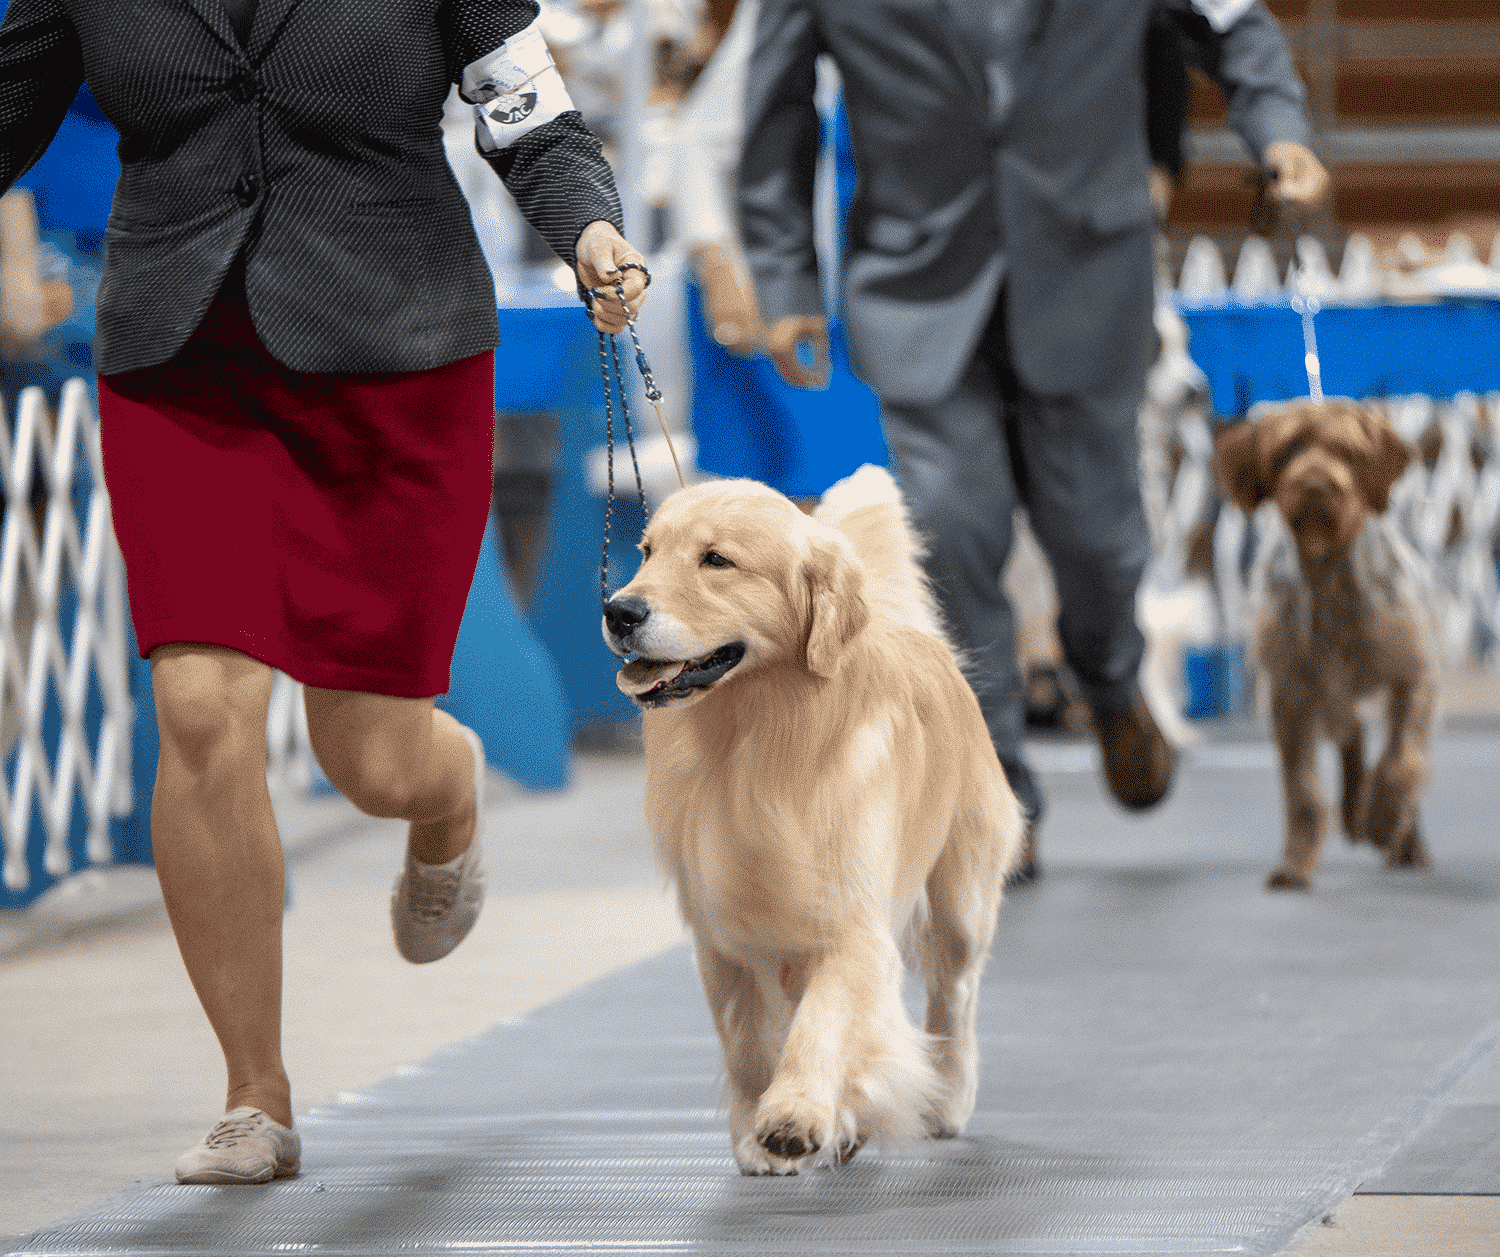 Showing Dogs for Friends | It usually begins innocently enough. You’re showing your dog when you’re spotted by a member of your local all-breed club